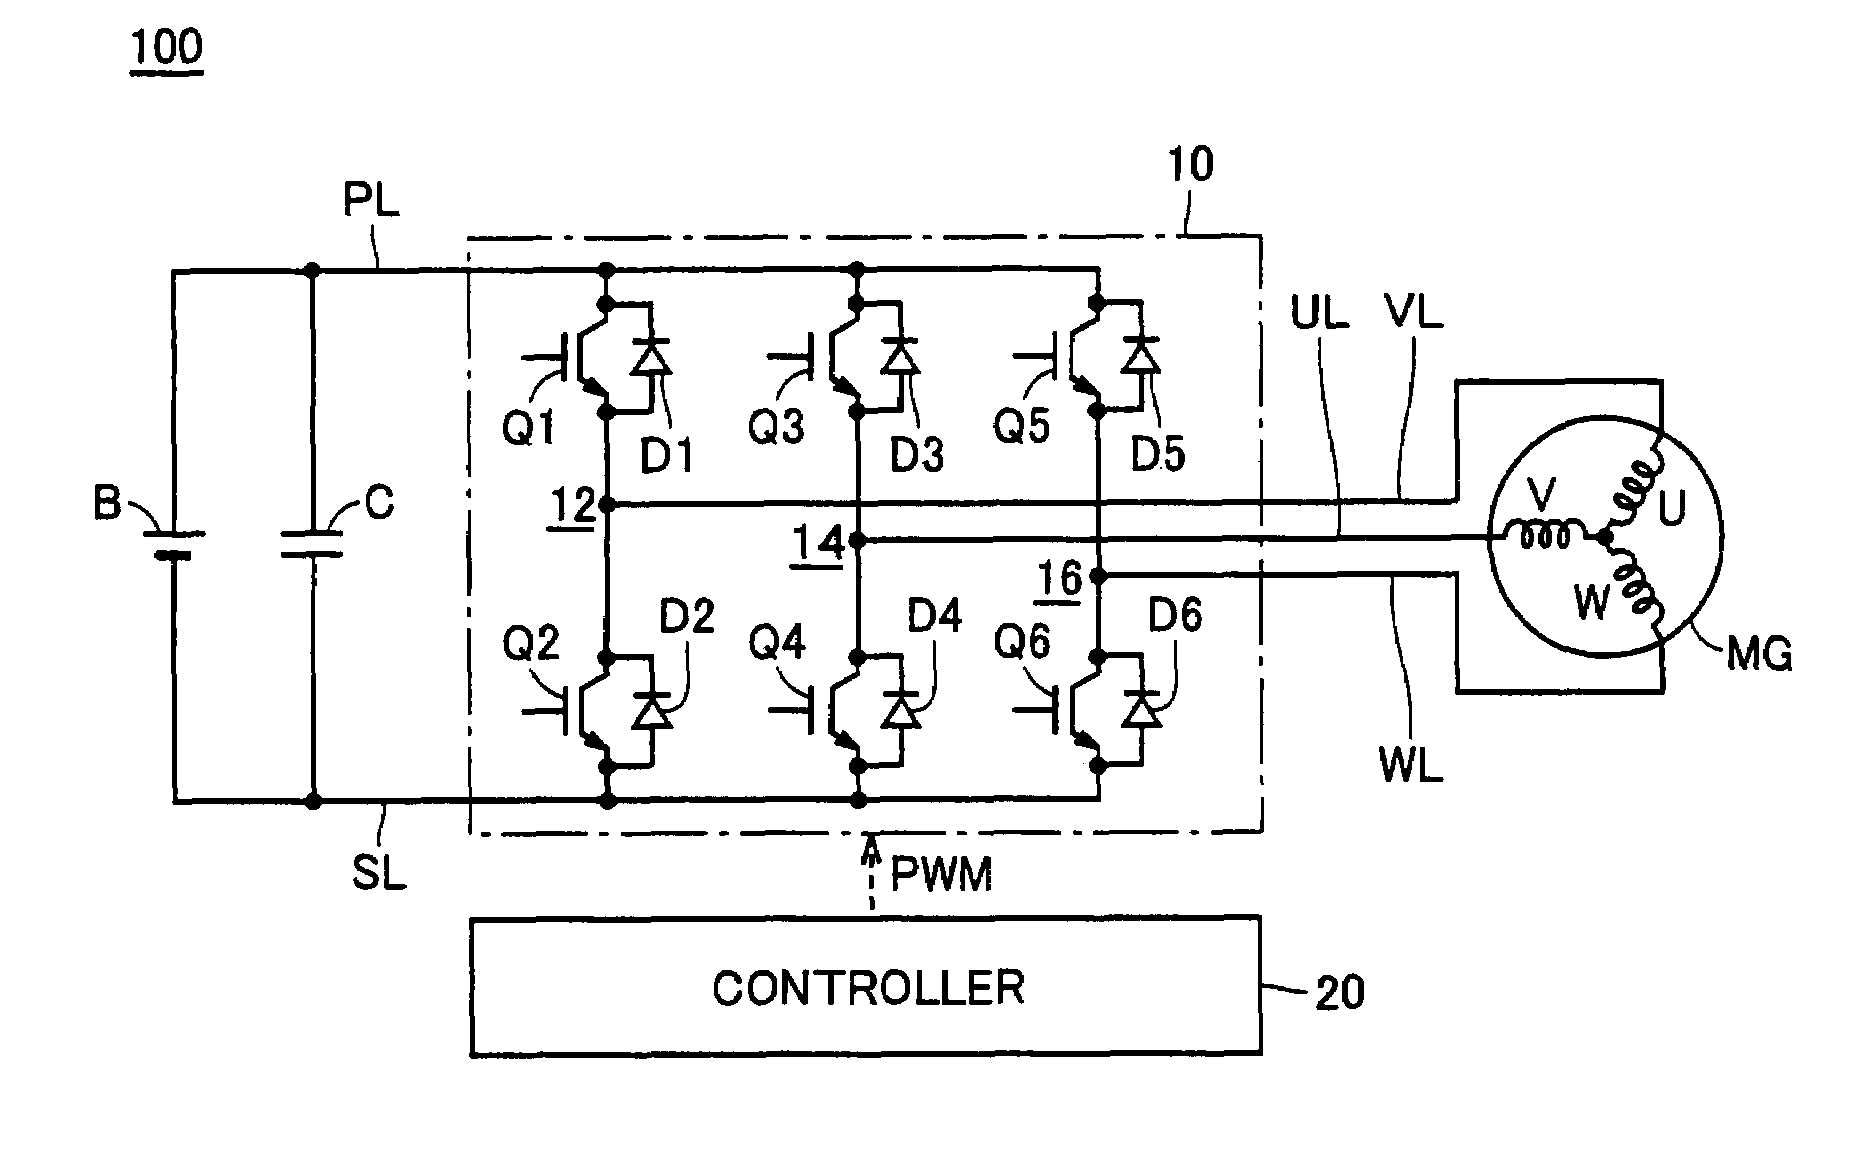 Heat dissipating fins opposite semiconductor elements